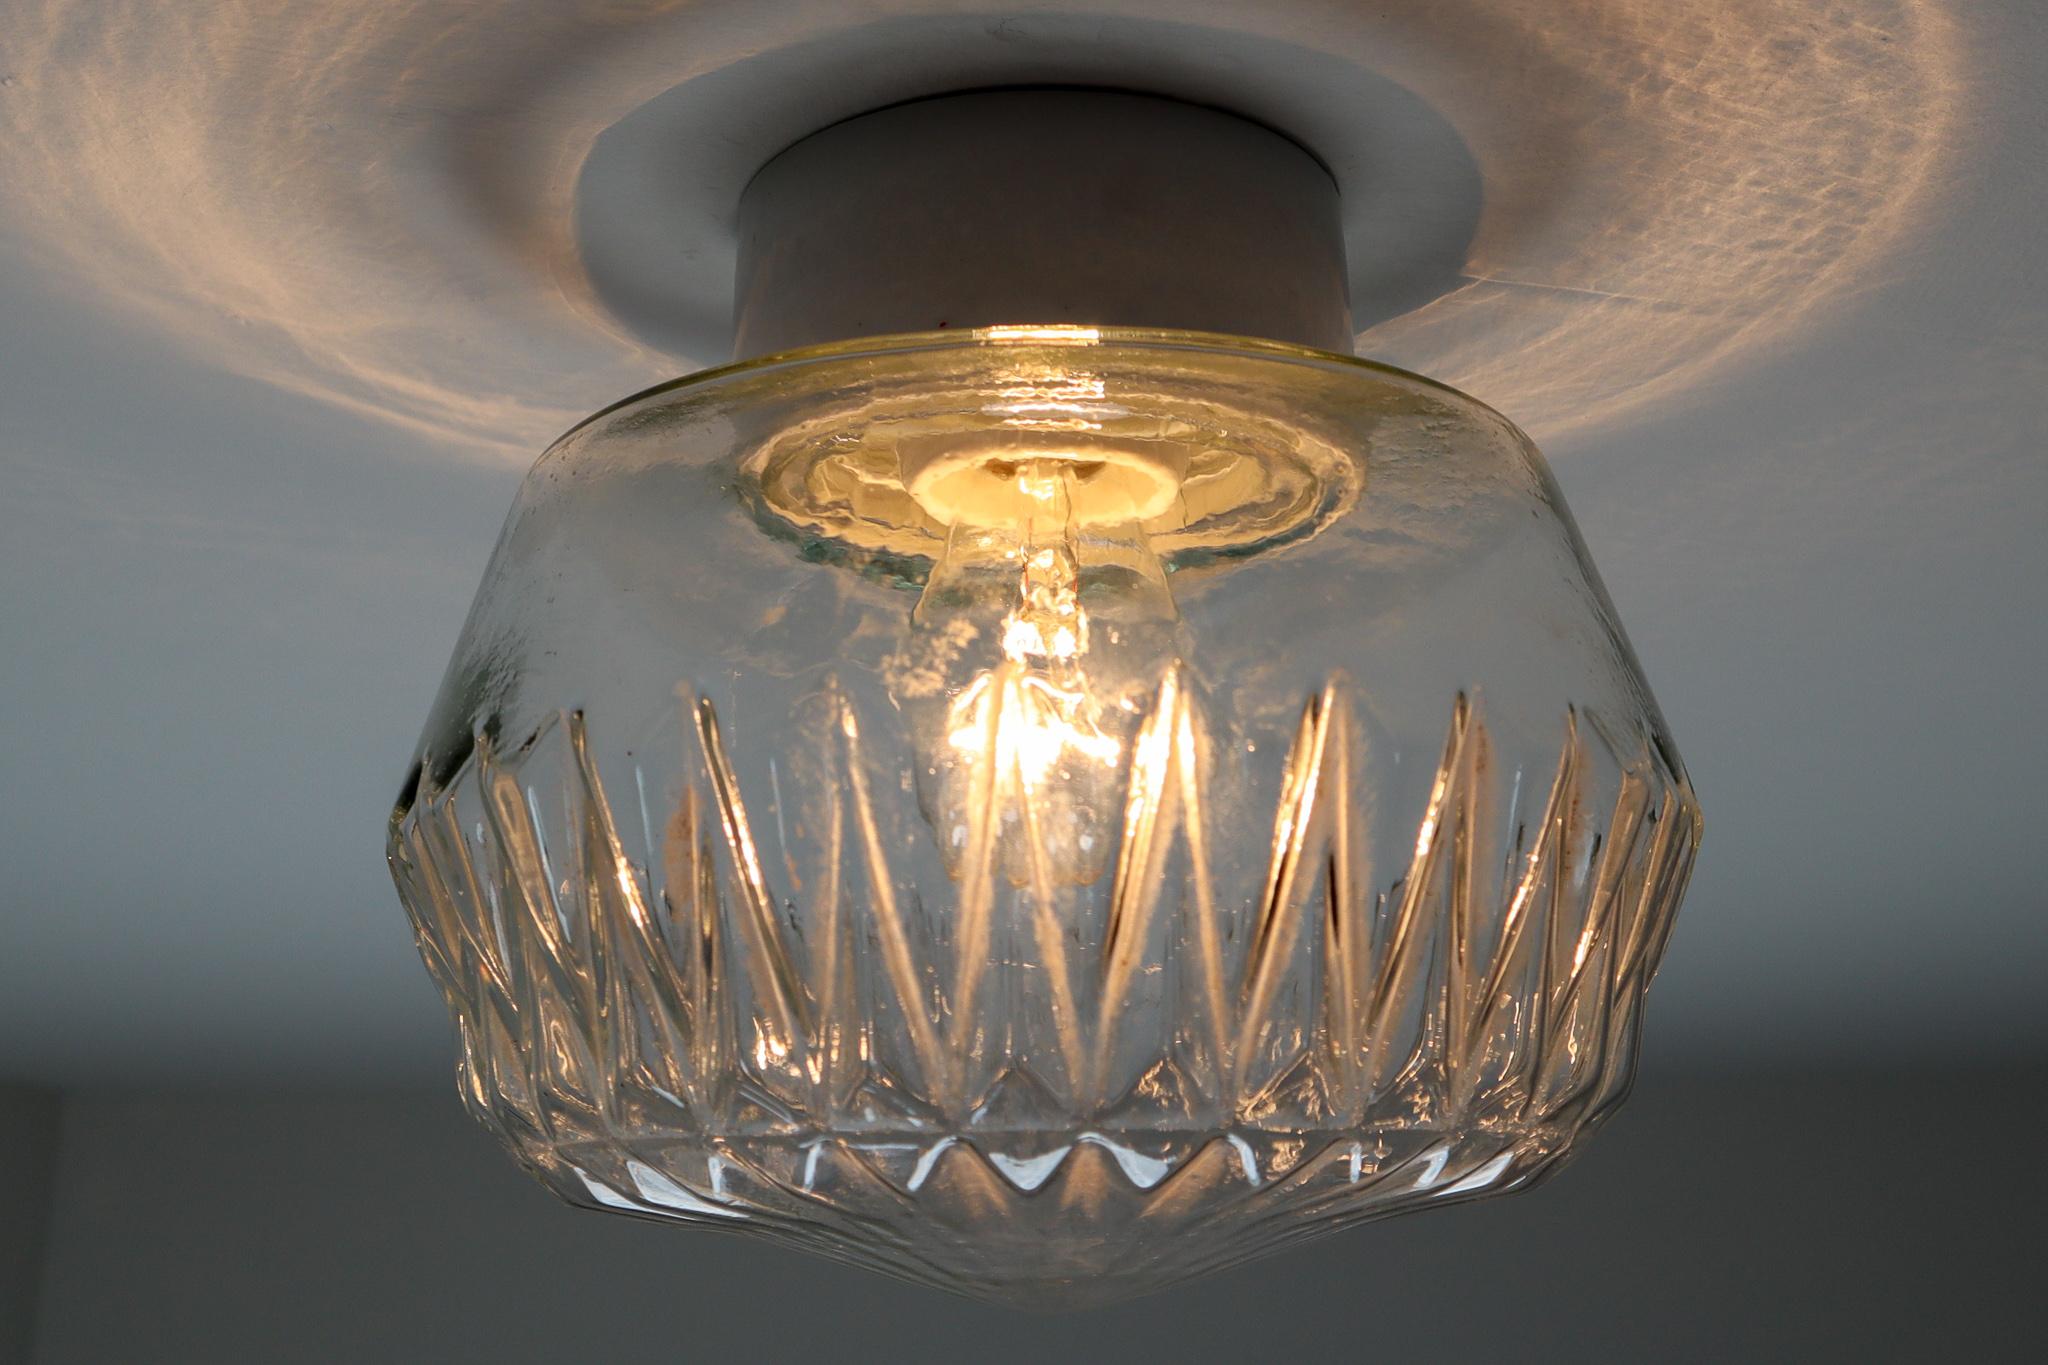 Set of two vintage modern wall /ceiling lights with clear structured glass and porcelain base, France, 1960s. The glass has pattern in it, what gives a nice diffuse light effect and a nice pattern on ceiling and walls, these wall scones/ceiling